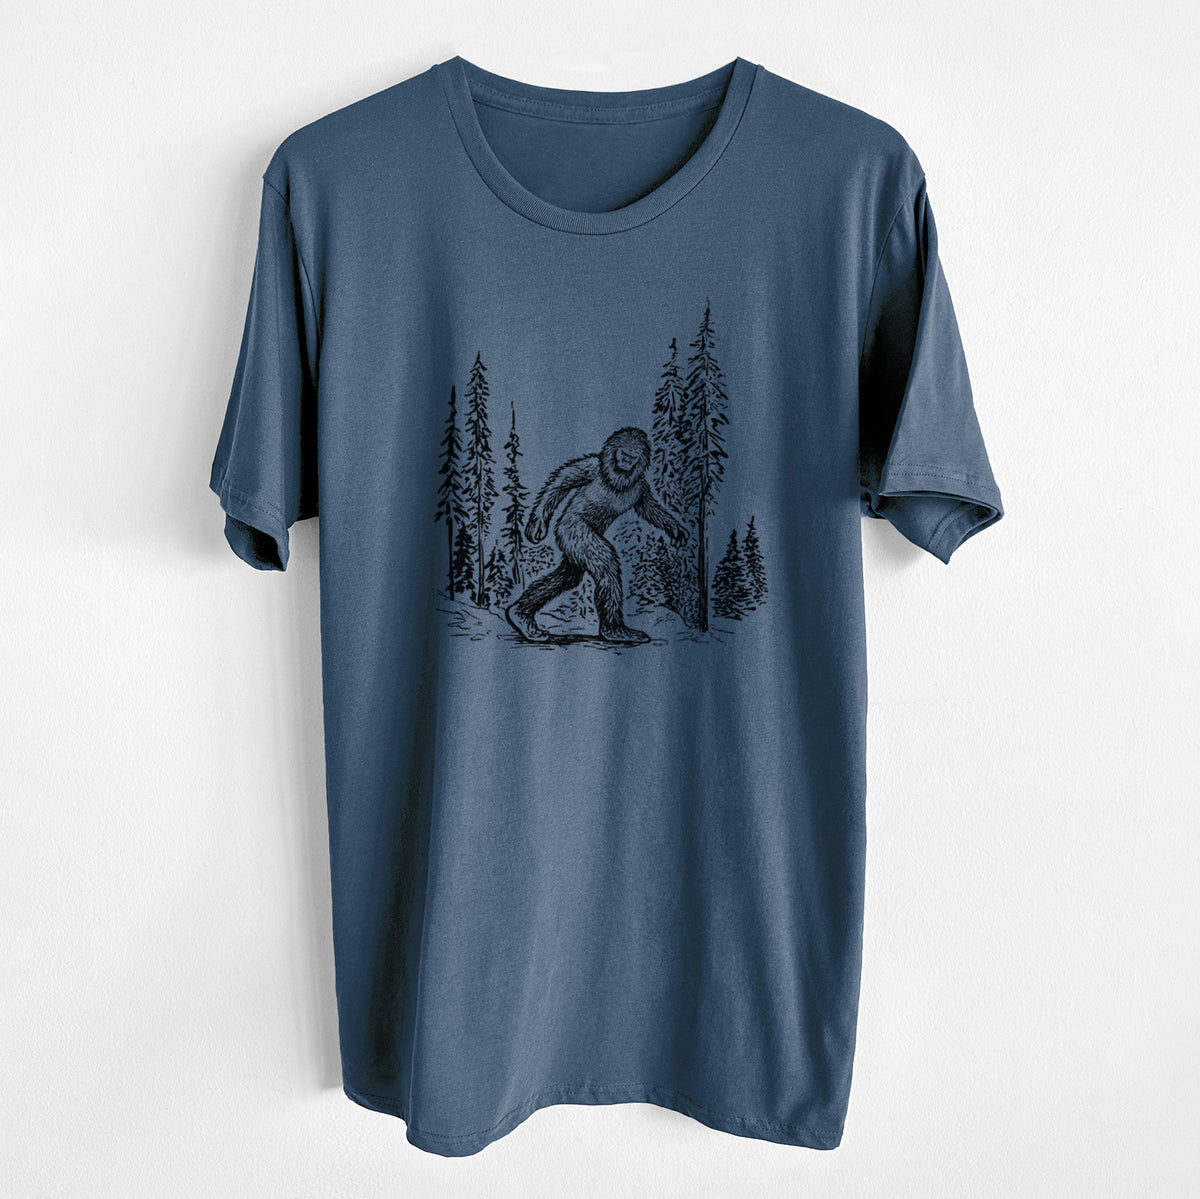 Bigfoot in the Woods - Unisex Crewneck - Made in USA - 100% Organic Cotton